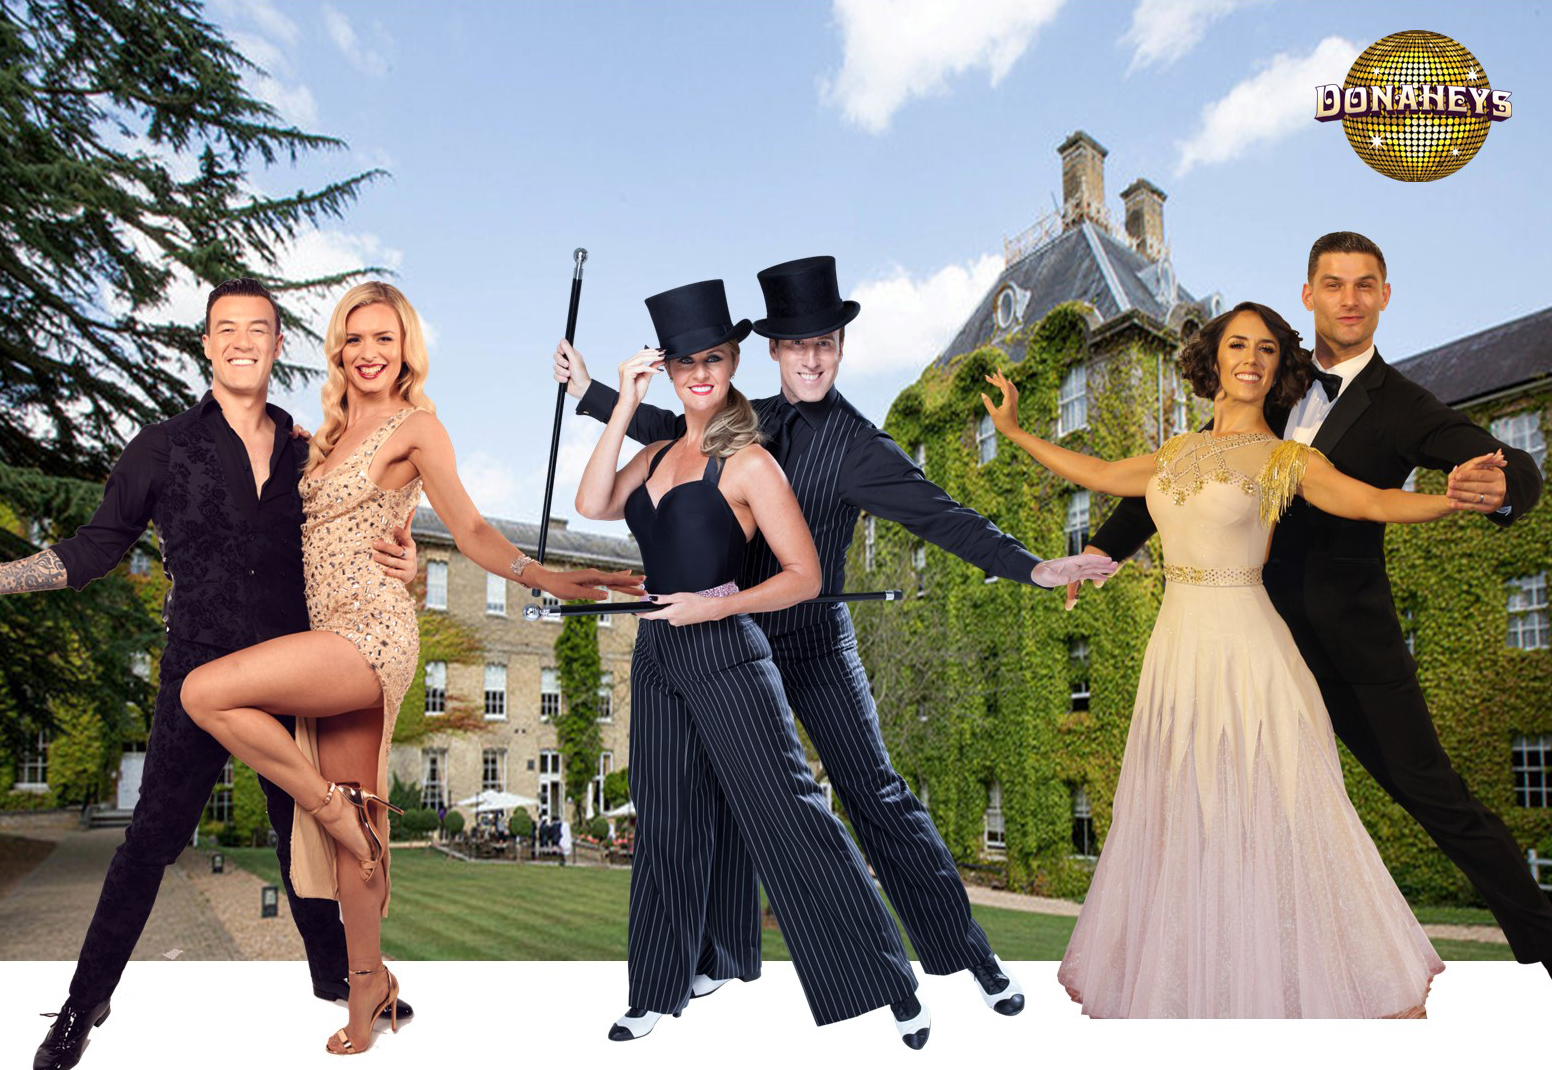 Donaheys Dancing With The Stars Weekend March 2023 Old Windsor, Old Windsor, England, United Kingdom